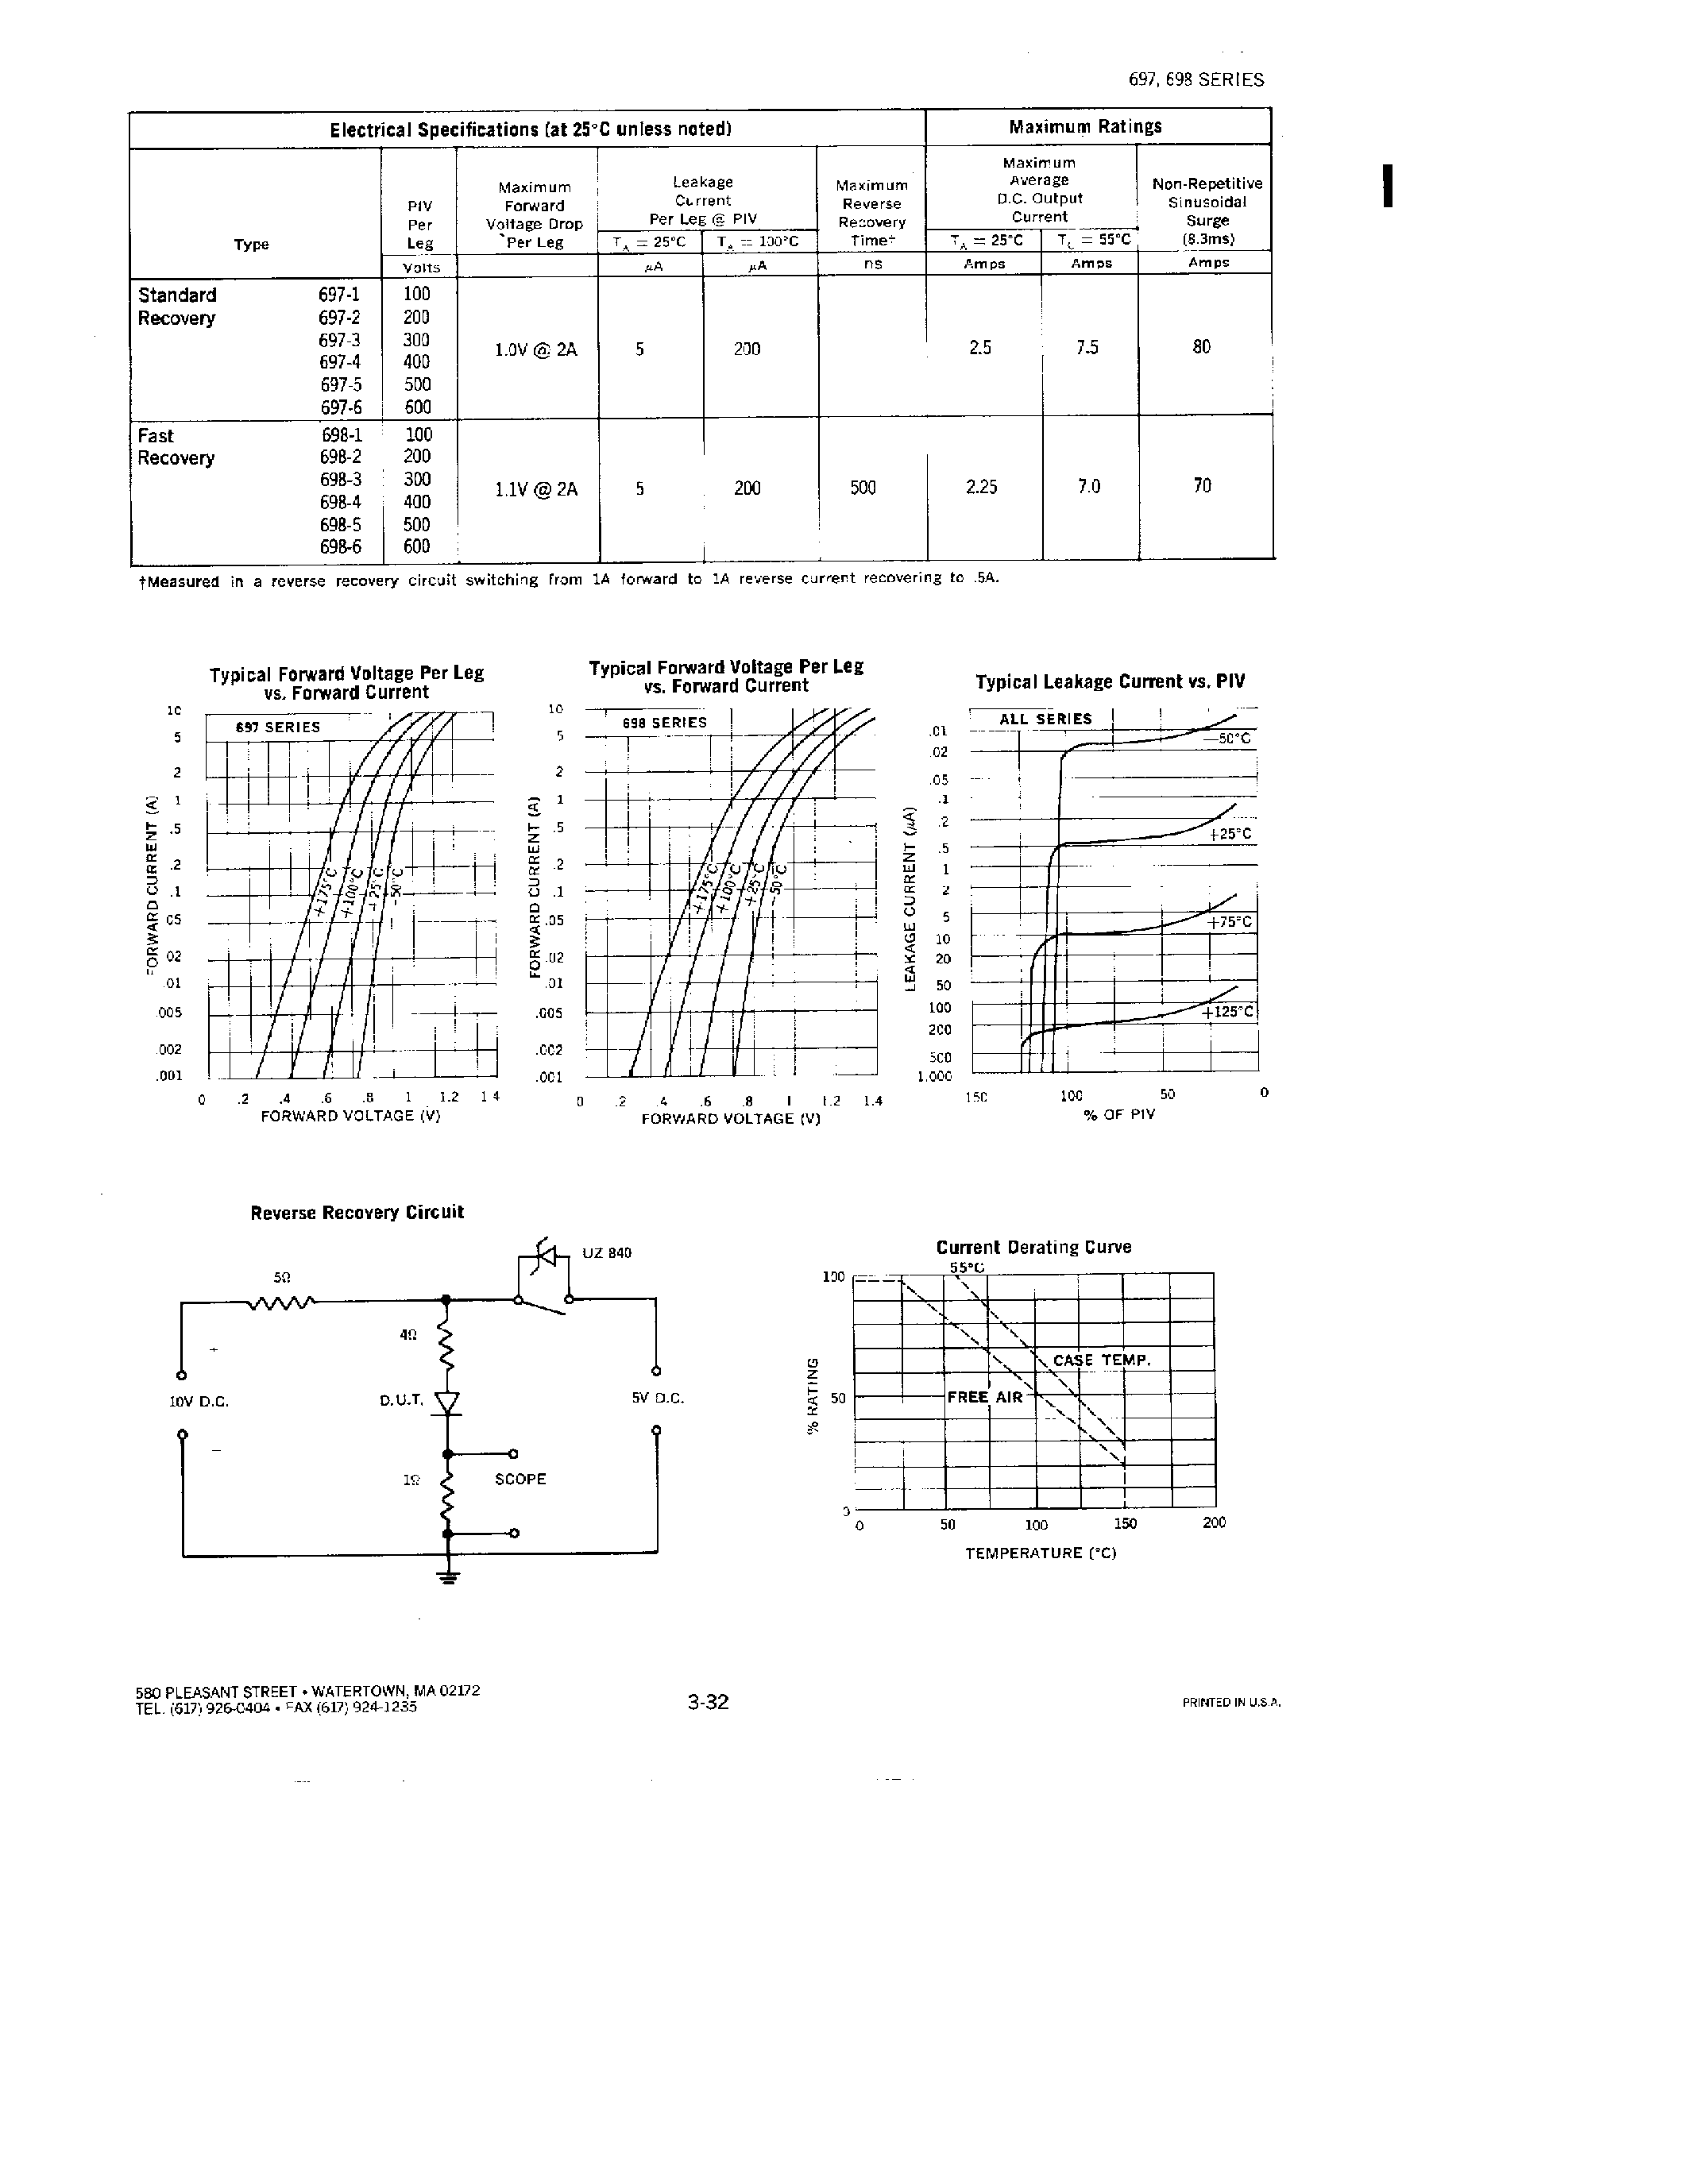 Datasheet 698-5 - RECTIFIERS ASSEMBLIES SINGLE PHASE BRIDGES/ 7.5 AMP/ STANDARD AND FAST RECOVERY page 2